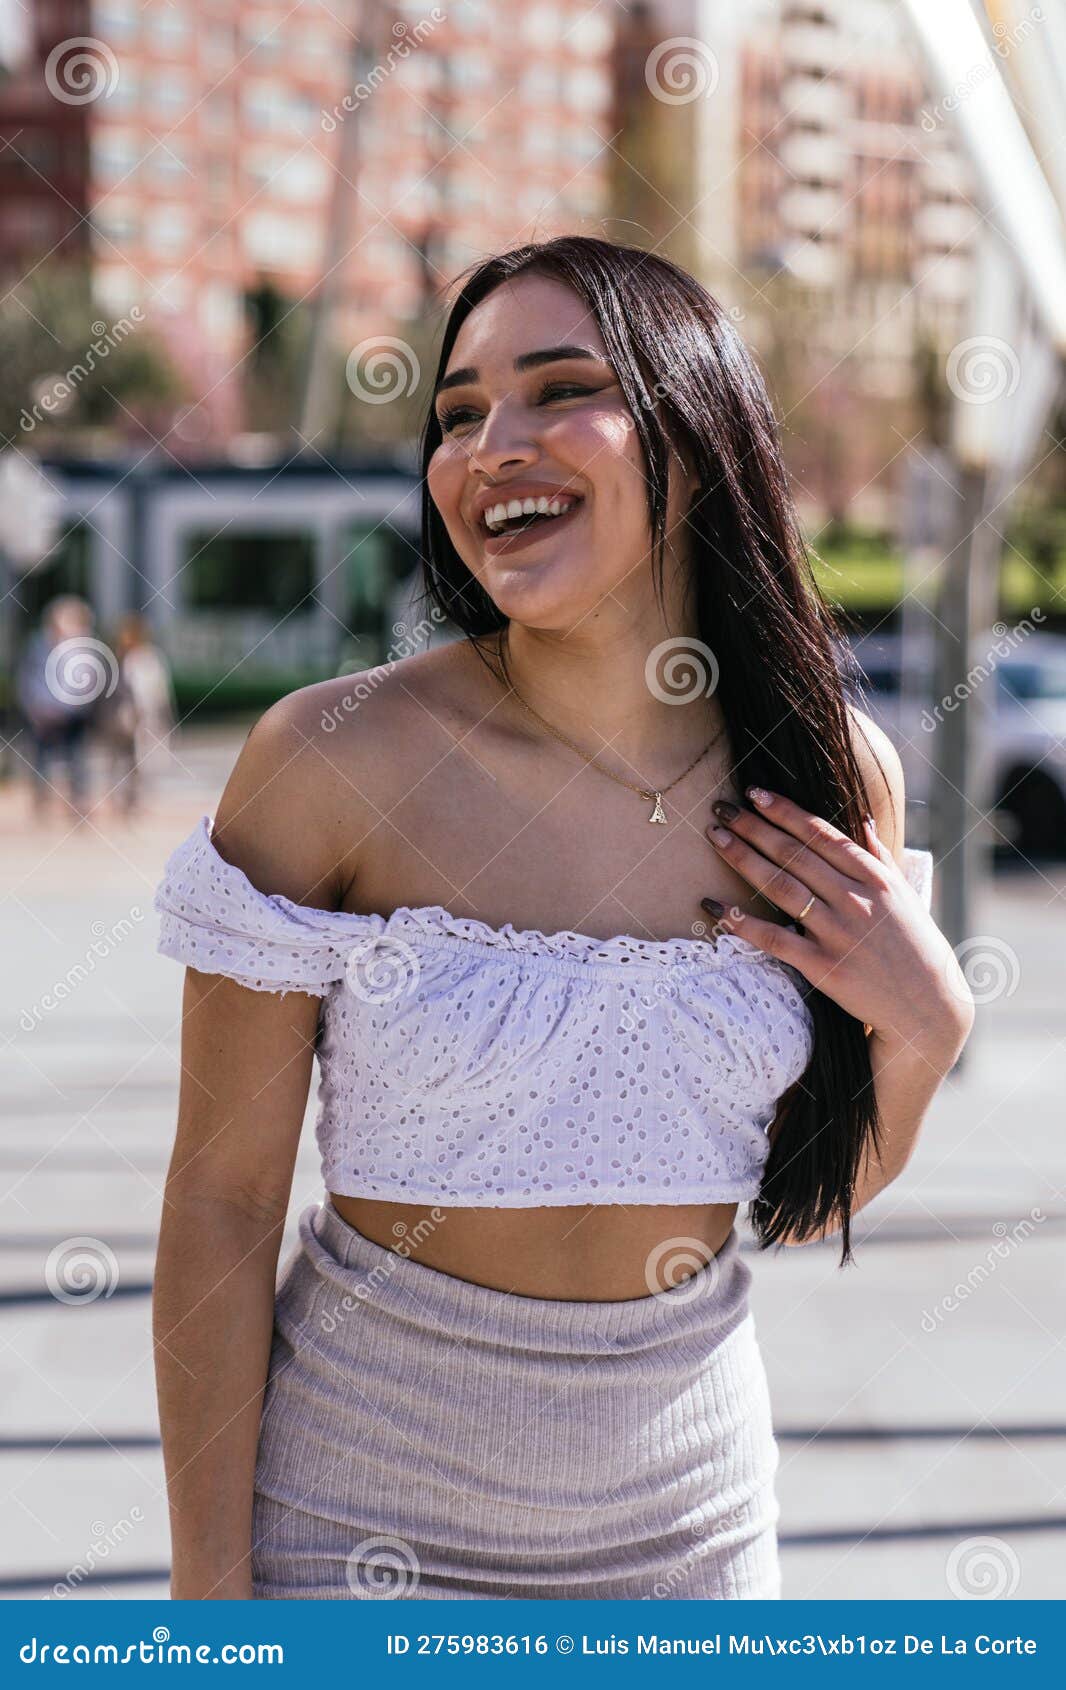 sunny street style: beautiful latina smiling in modern casual attire with tram in background